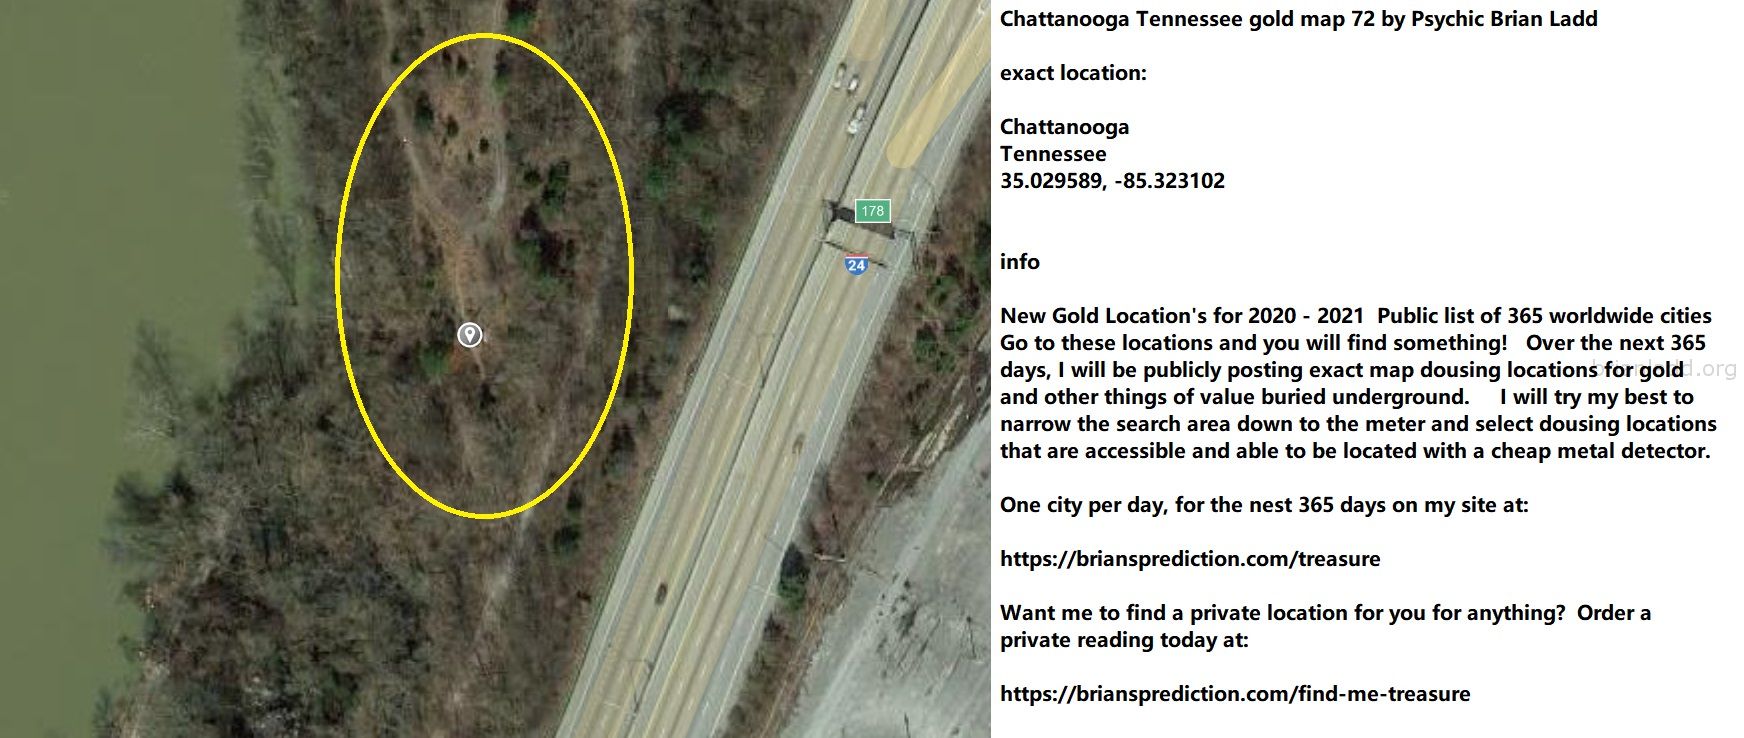 Chattanooga Tennessee gold map 72 by Psychic Brian Ladd
New Gold Location's for 2020 - 2021  Public list of 365 worldwide cities   Go to these locations and you will find something!   Over the next 365 days, I will be publicly posting exact map dousing locations for gold and other things of value buried underground.     I will try my best to narrow the search area down to the meter and select dousing locations that are accessible and able to be located with a cheap metal detector. One city per day, for the nest 365 days on my site at:  https://briansprediction.com/treasure  Want me to find a private location for you for anything?  Order a private reading today at:  https://briansprediction.com/find-me-treasure
